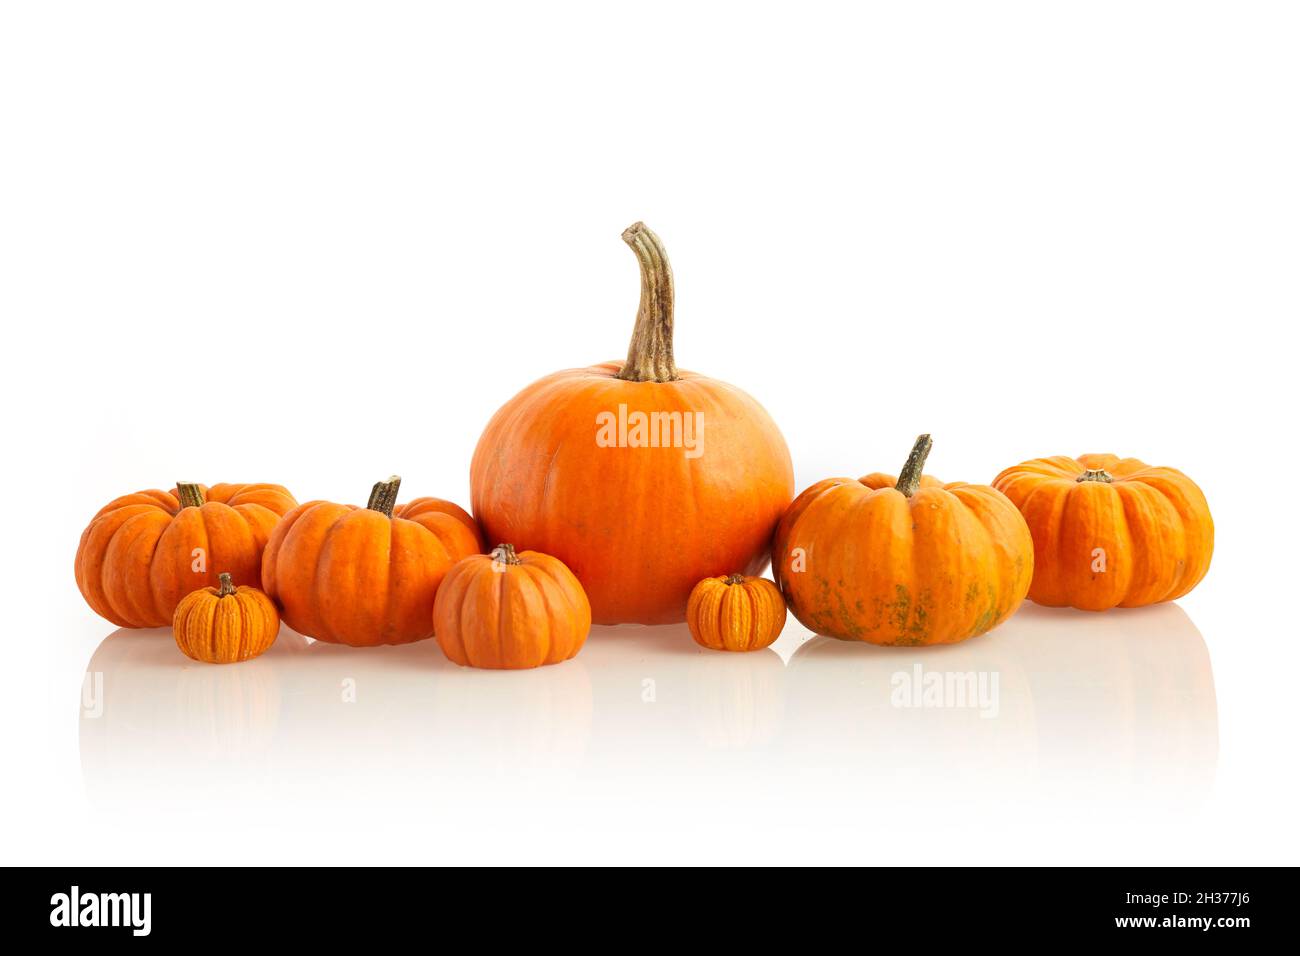 Orange pumpkins standing in line on white background. Front view Stock Photo